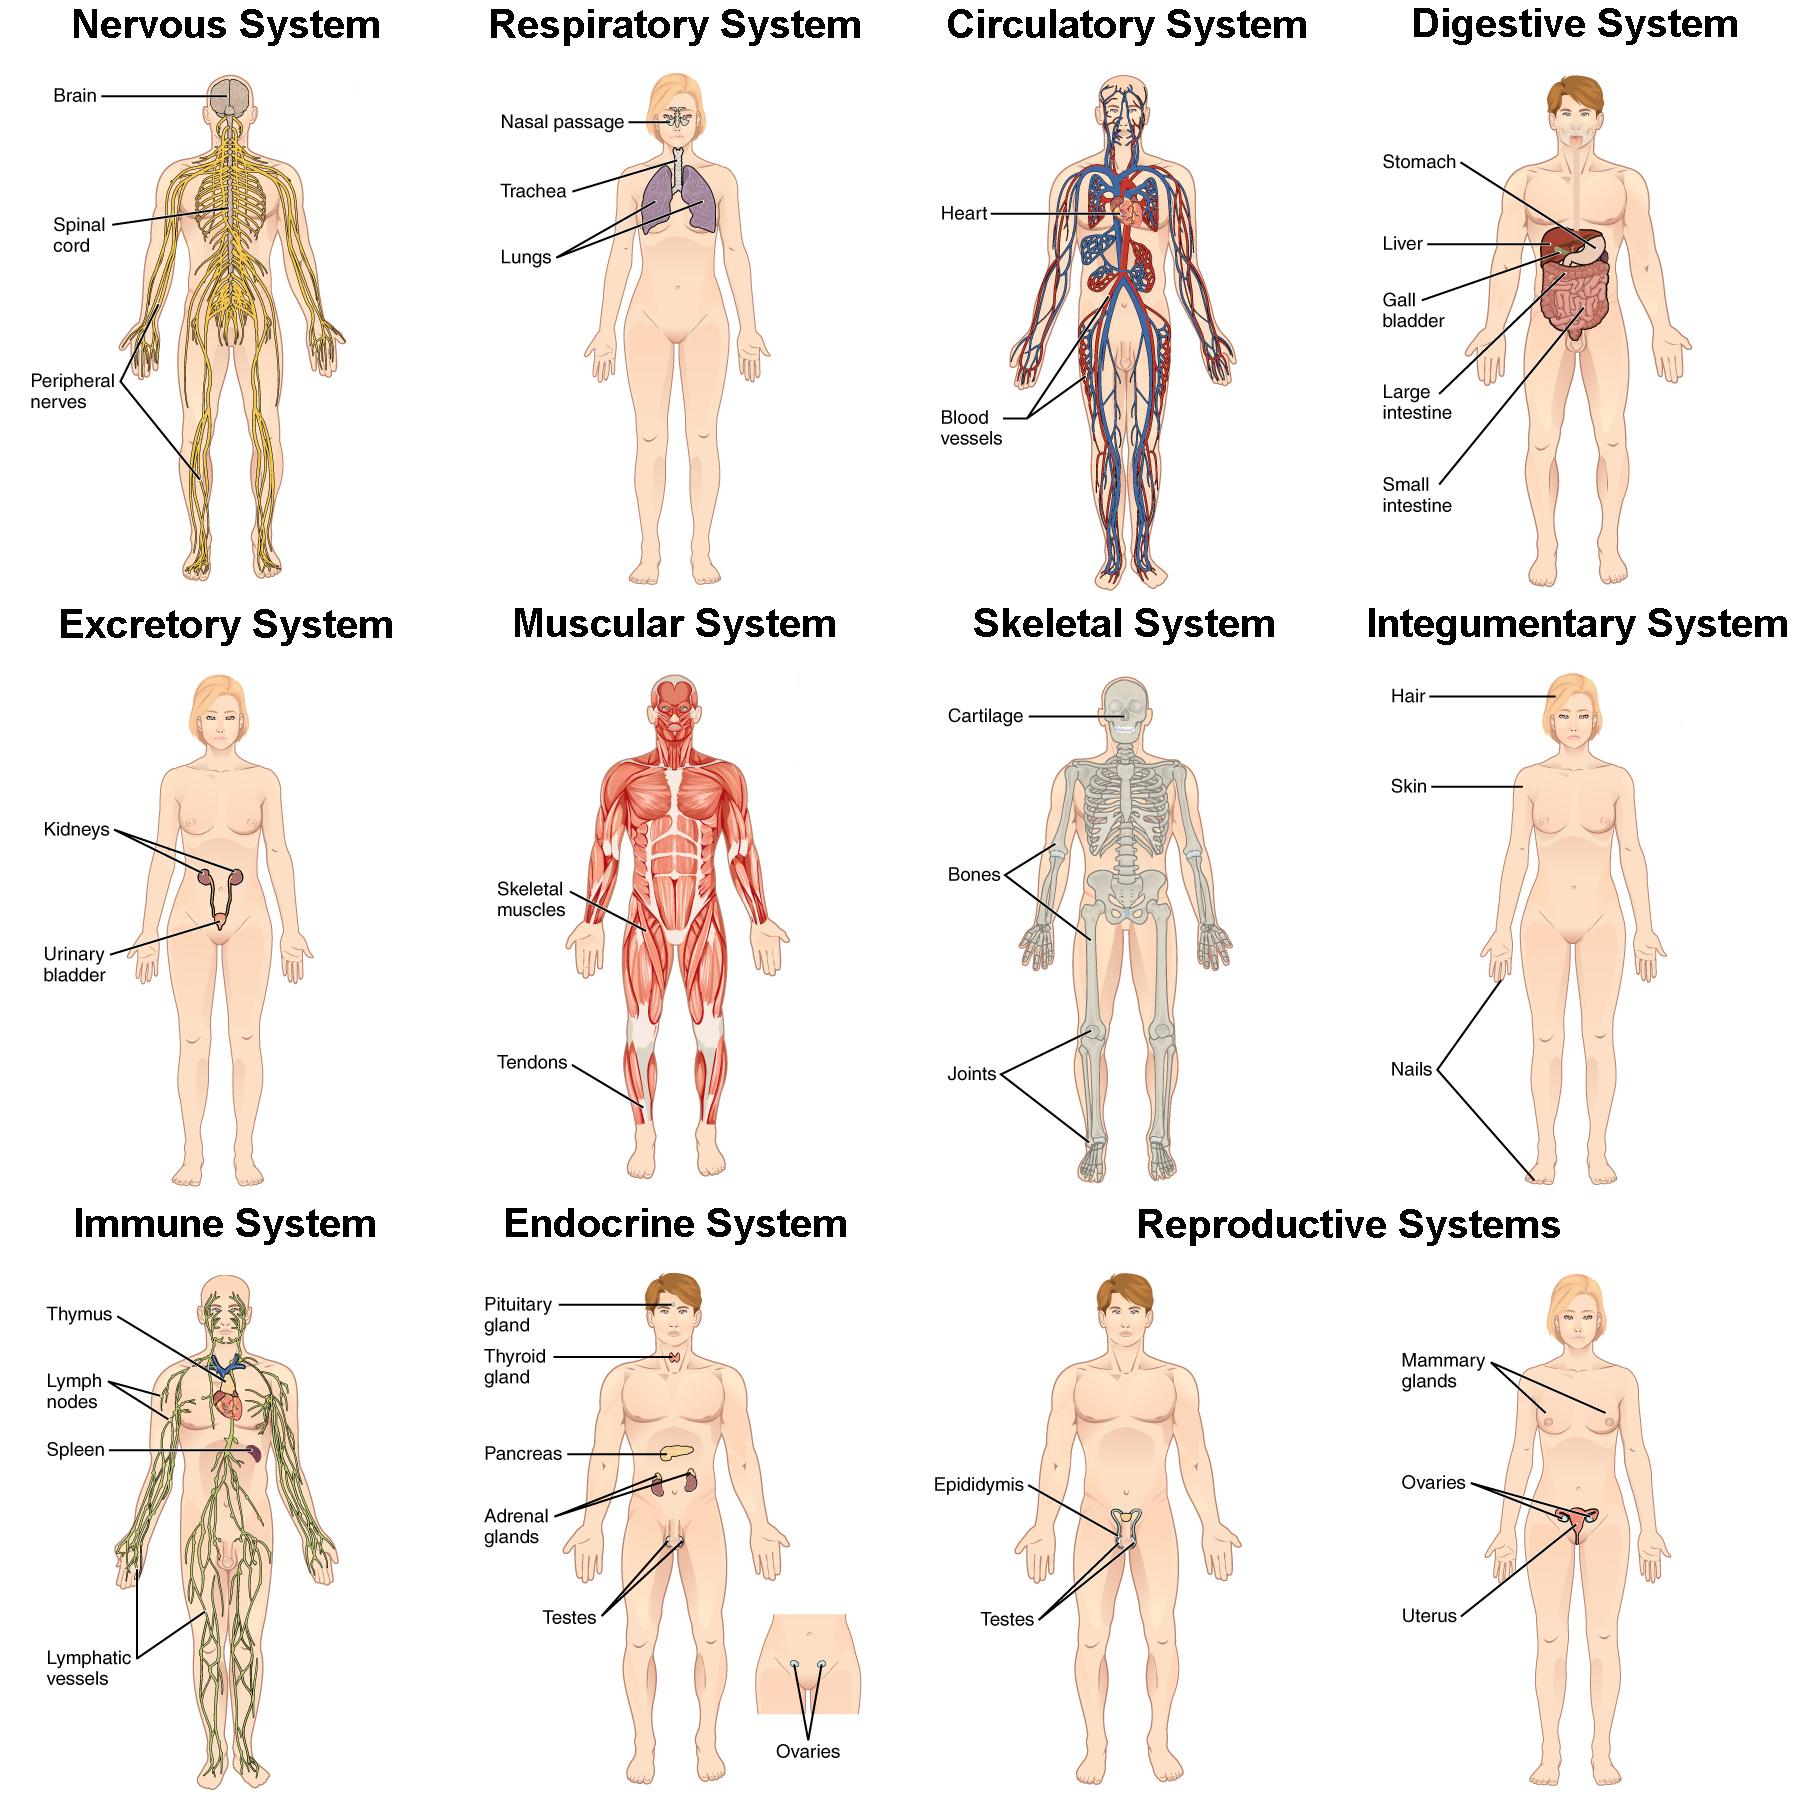 This picture shows eleven human body structures, each labeled with a specific organ system of the body and the organs that body system contains: the nervous system, the respiratory system, the circulatory system, the digestive system, the excretory system, the muscular system, the skeletal system, the integumentary system, the immune system, the endocrine system, and the reproductive system. Each of these systems, the organs that make up each system, and their basic functions are listed in Table 3.1.